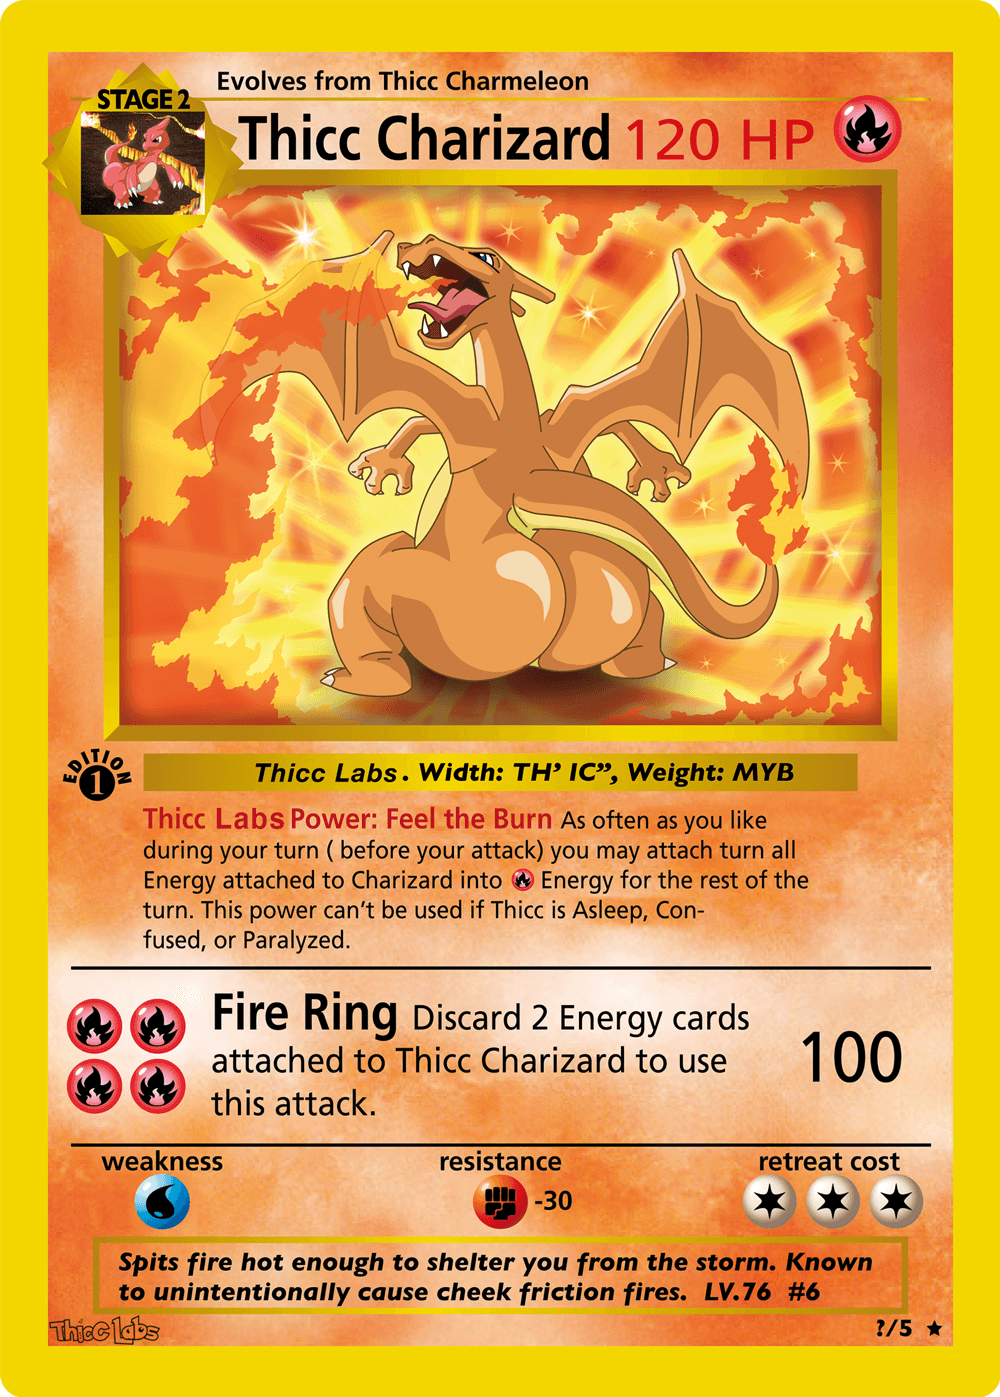 Thicc Charizard